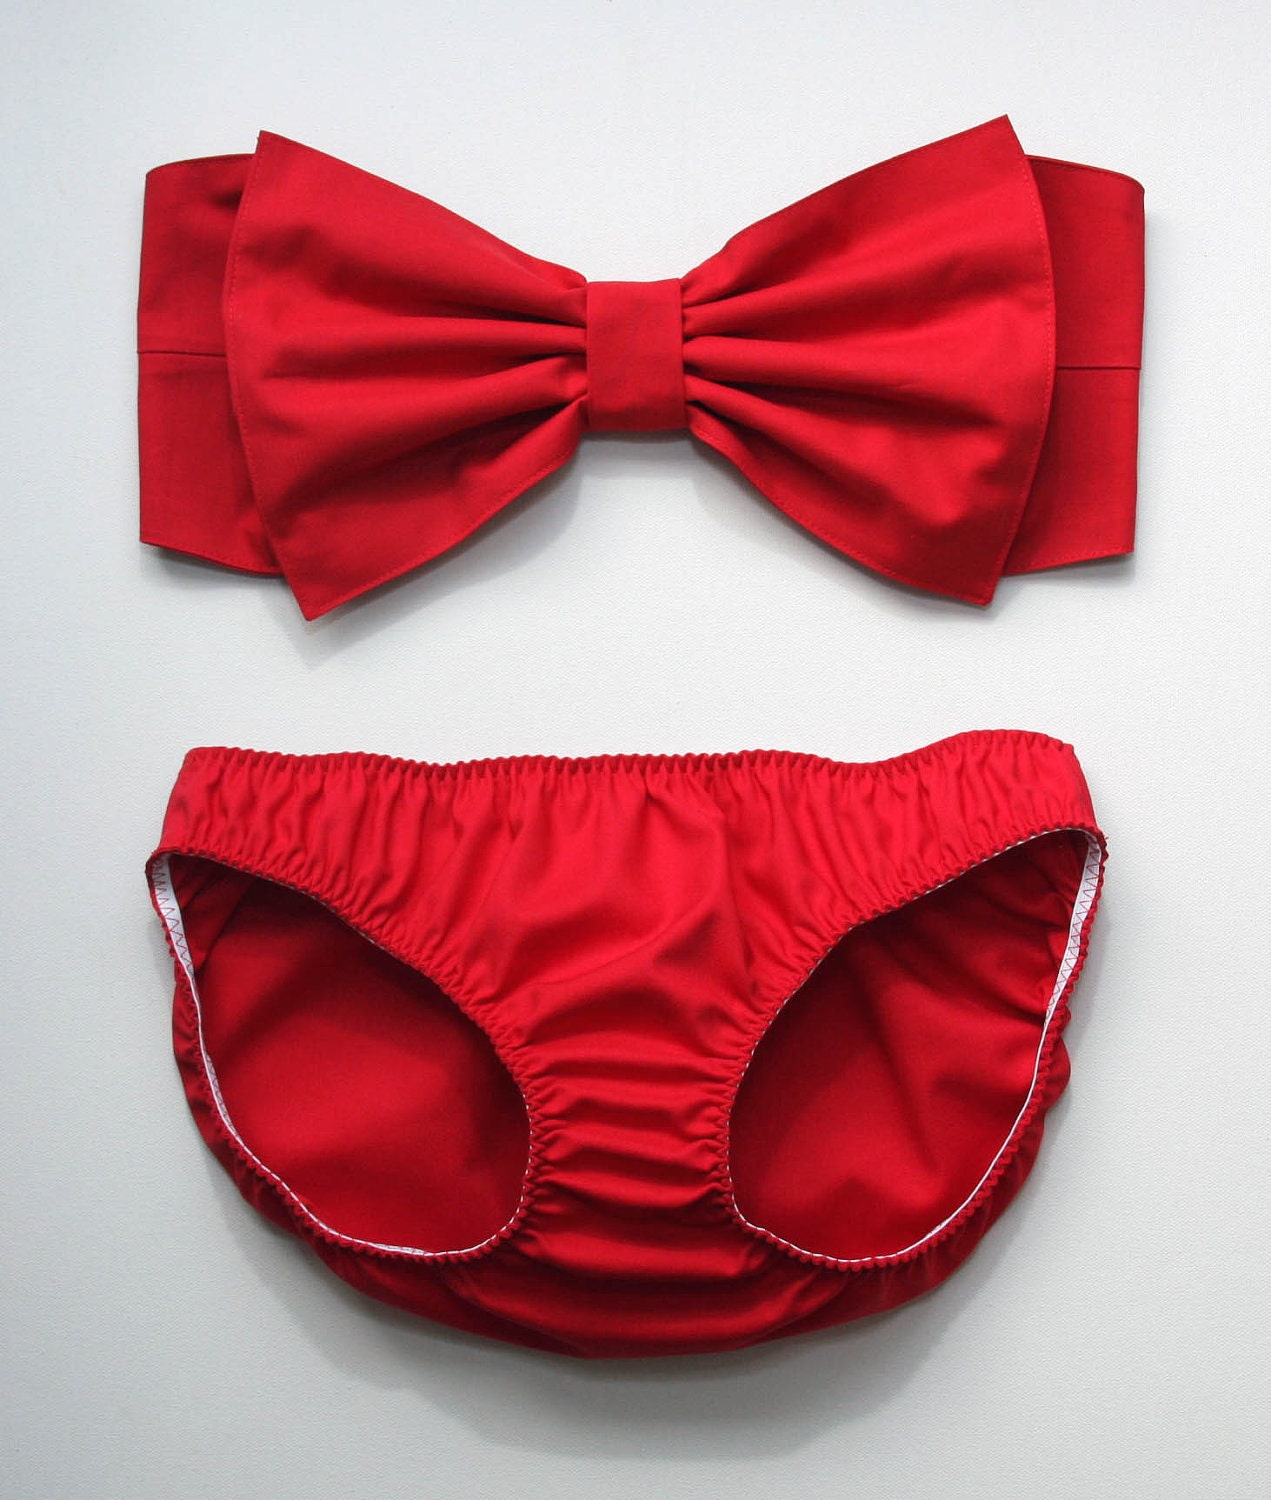 Plain red bow bandeau set - Made to order